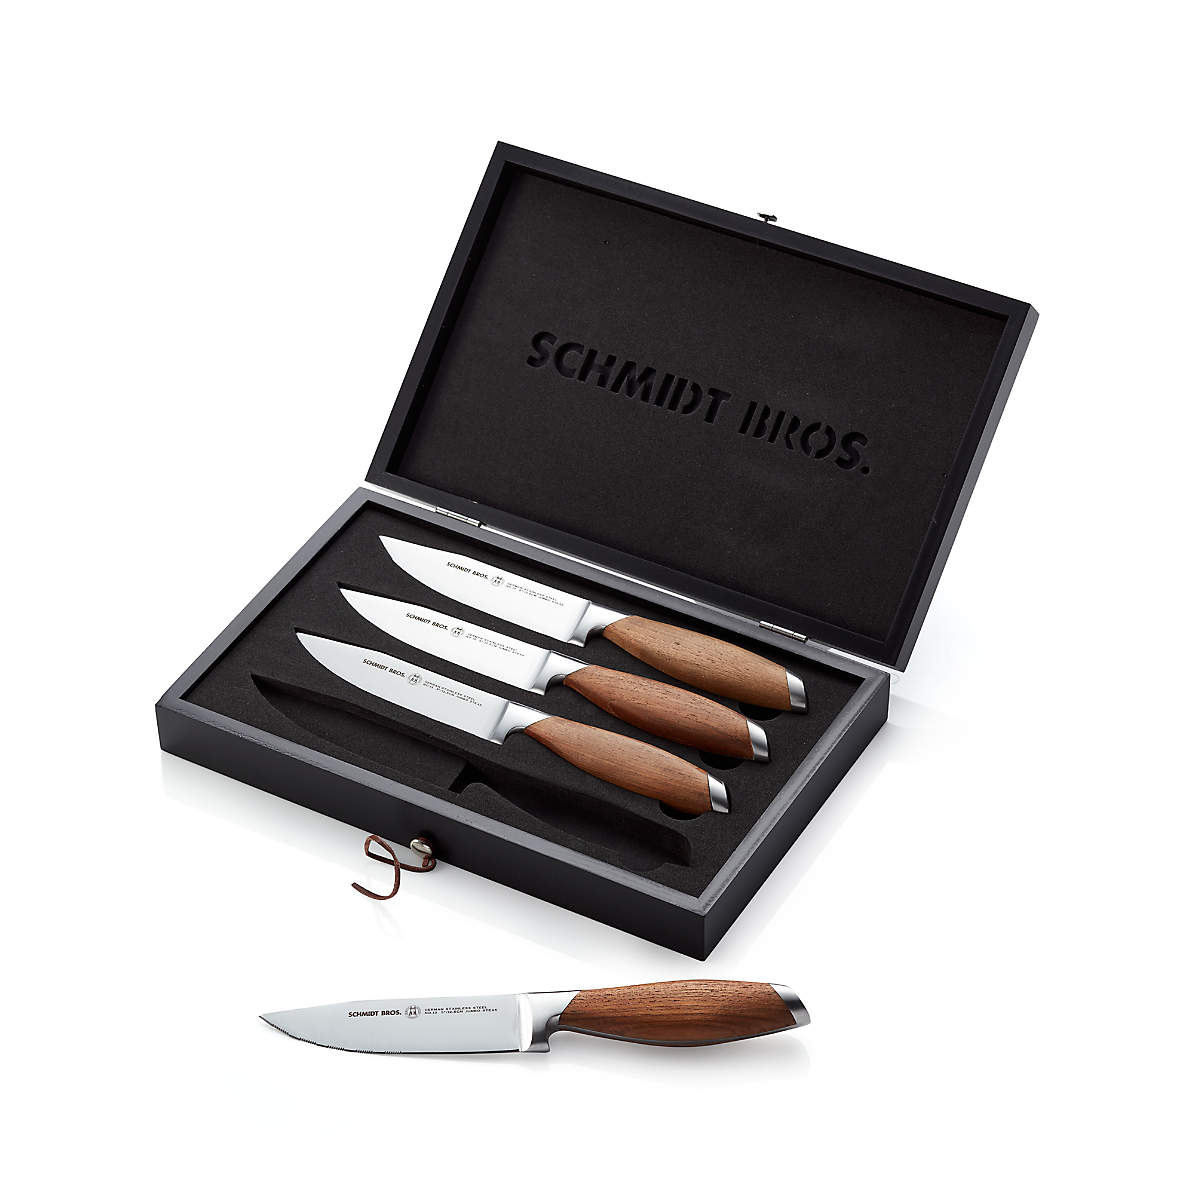 Up To 60% Off on Cheese/Steak Knife Set (4-Pc.)